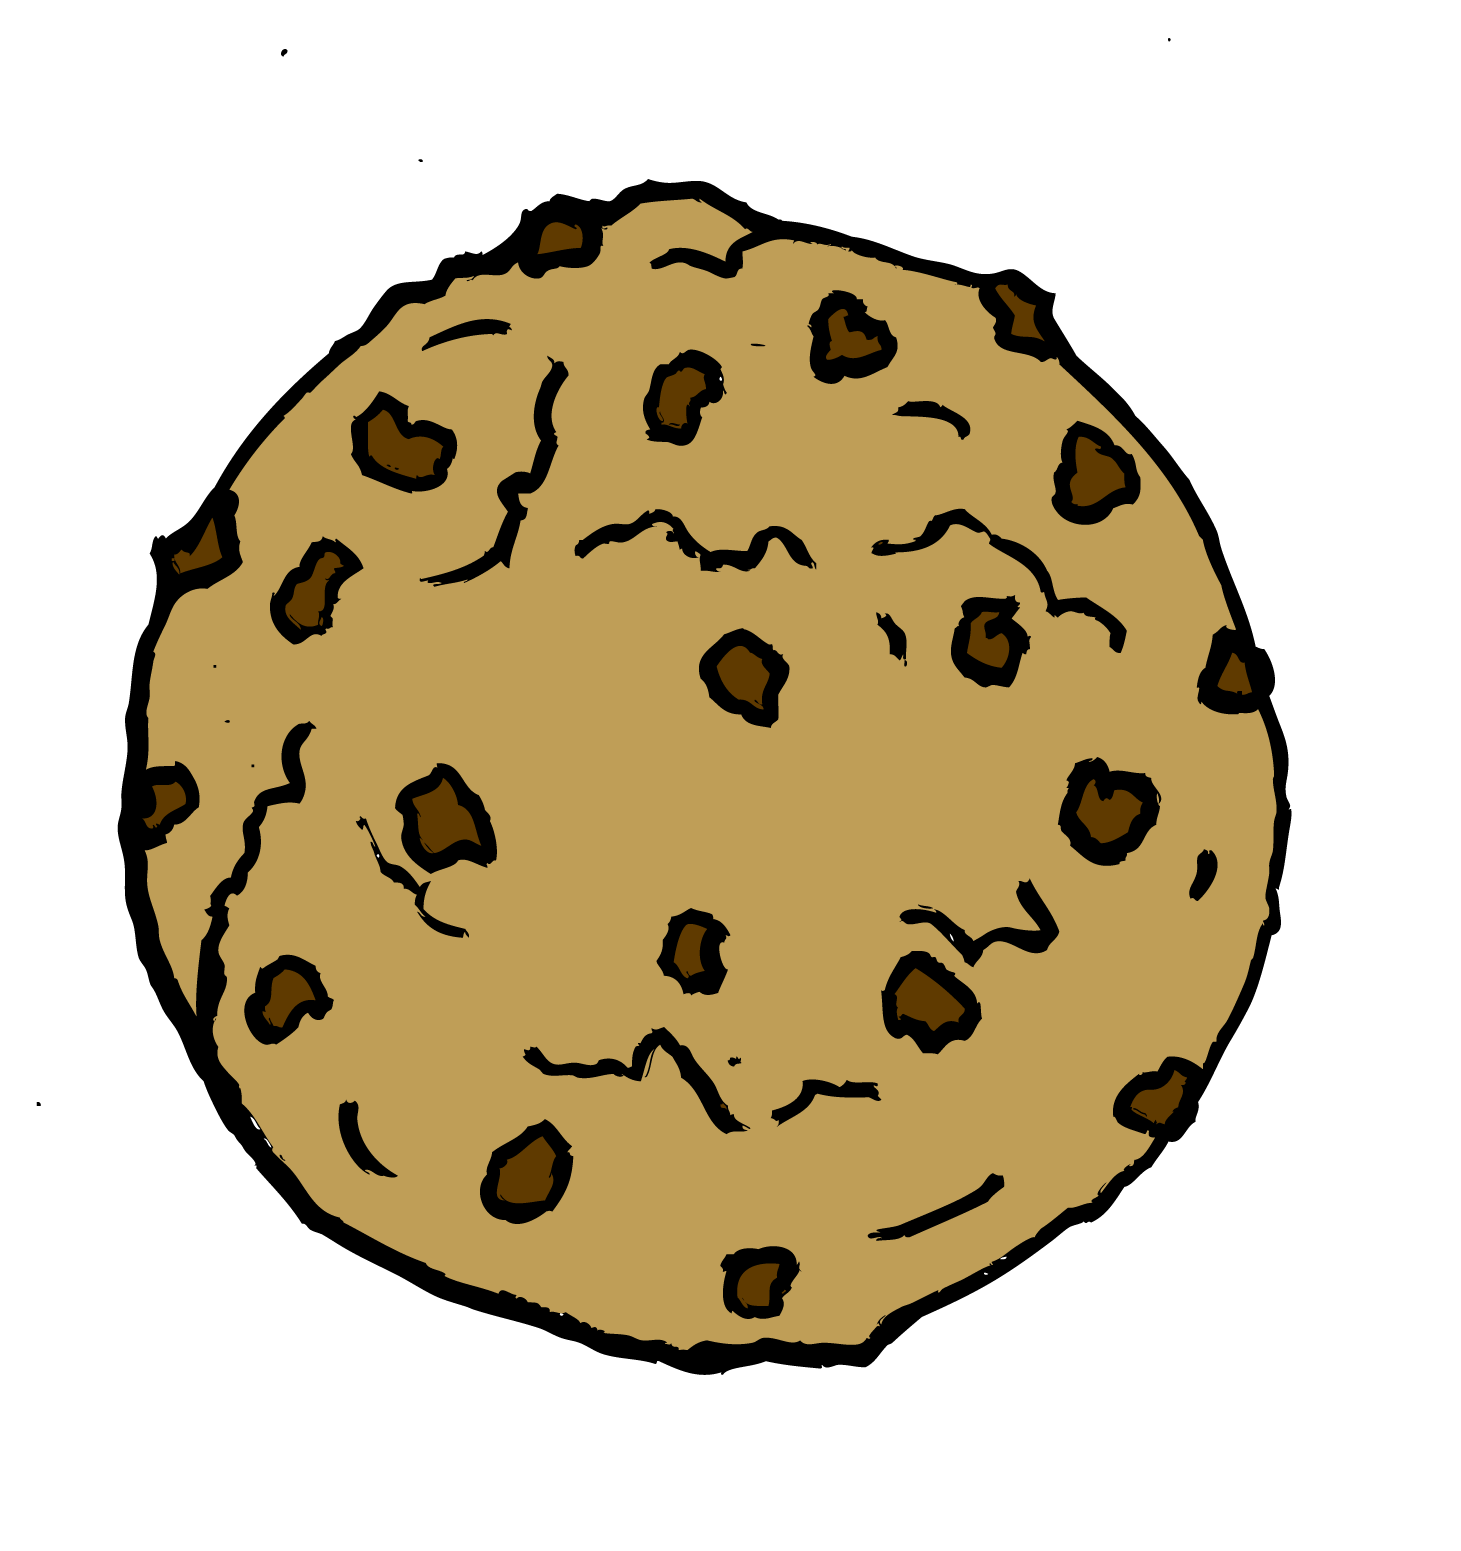 Cookie jar clipart free images 2 2.